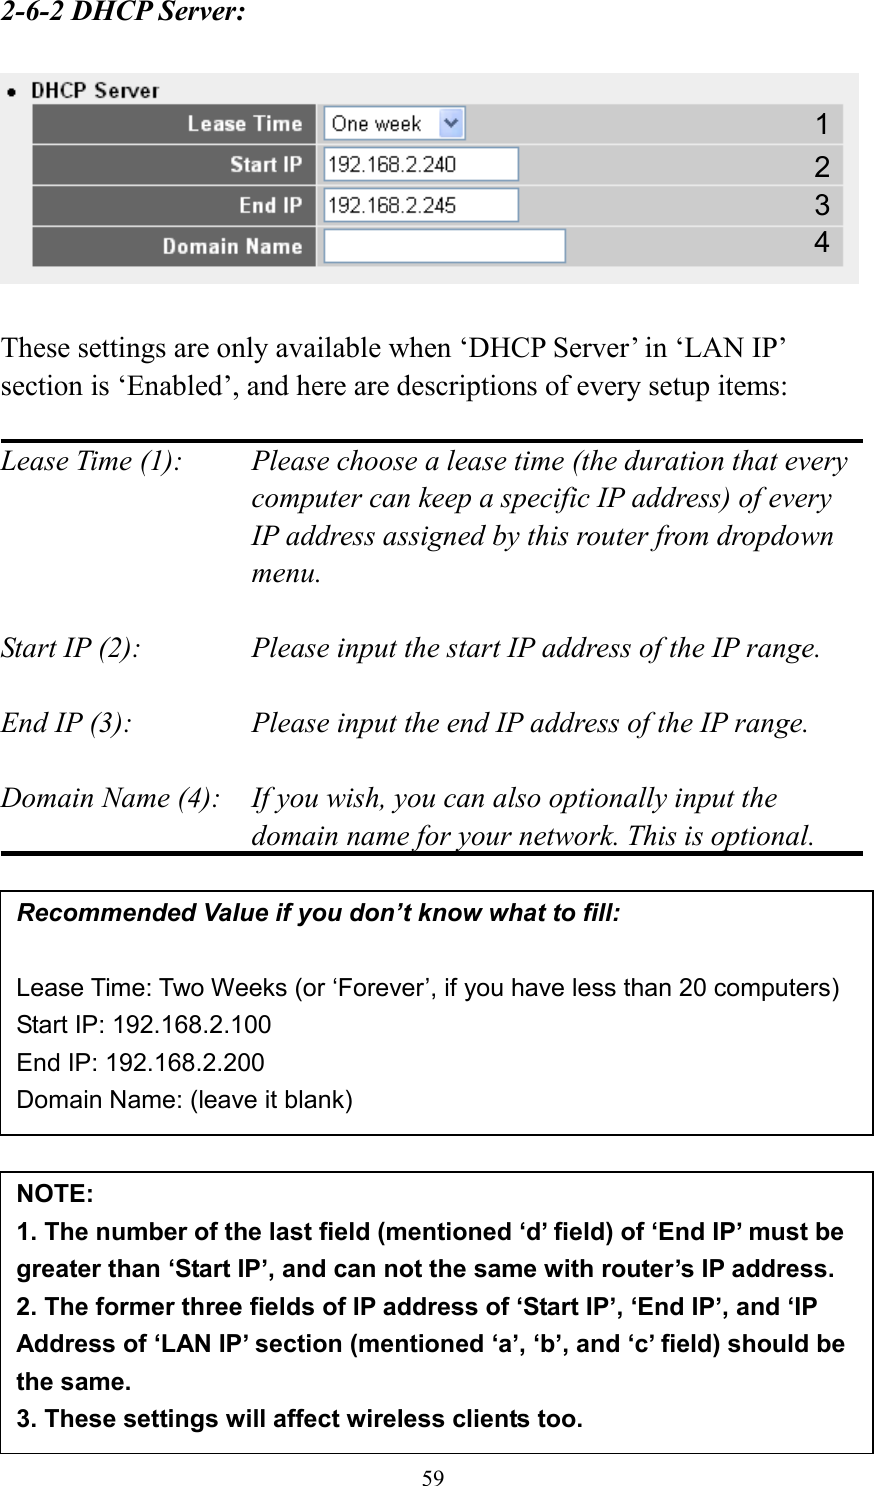 59 2-6-2 DHCP Server:    These settings are only available when ‘DHCP Server’ in ‘LAN IP’ section is ‘Enabled’, and here are descriptions of every setup items:  Lease Time (1):    Please choose a lease time (the duration that every computer can keep a specific IP address) of every IP address assigned by this router from dropdown menu.  Start IP (2):      Please input the start IP address of the IP range.  End IP (3):       Please input the end IP address of the IP range.  Domain Name (4):    If you wish, you can also optionally input the domain name for your network. This is optional.                Recommended Value if you don’t know what to fill:  Lease Time: Two Weeks (or ‘Forever’, if you have less than 20 computers) Start IP: 192.168.2.100 End IP: 192.168.2.200 Domain Name: (leave it blank) NOTE:   1. The number of the last field (mentioned ‘d’ field) of ‘End IP’ must be greater than ‘Start IP’, and can not the same with router’s IP address. 2. The former three fields of IP address of ‘Start IP’, ‘End IP’, and ‘IP Address of ‘LAN IP’ section (mentioned ‘a’, ‘b’, and ‘c’ field) should be the same. 3. These settings will affect wireless clients too. 1 3 4 2 